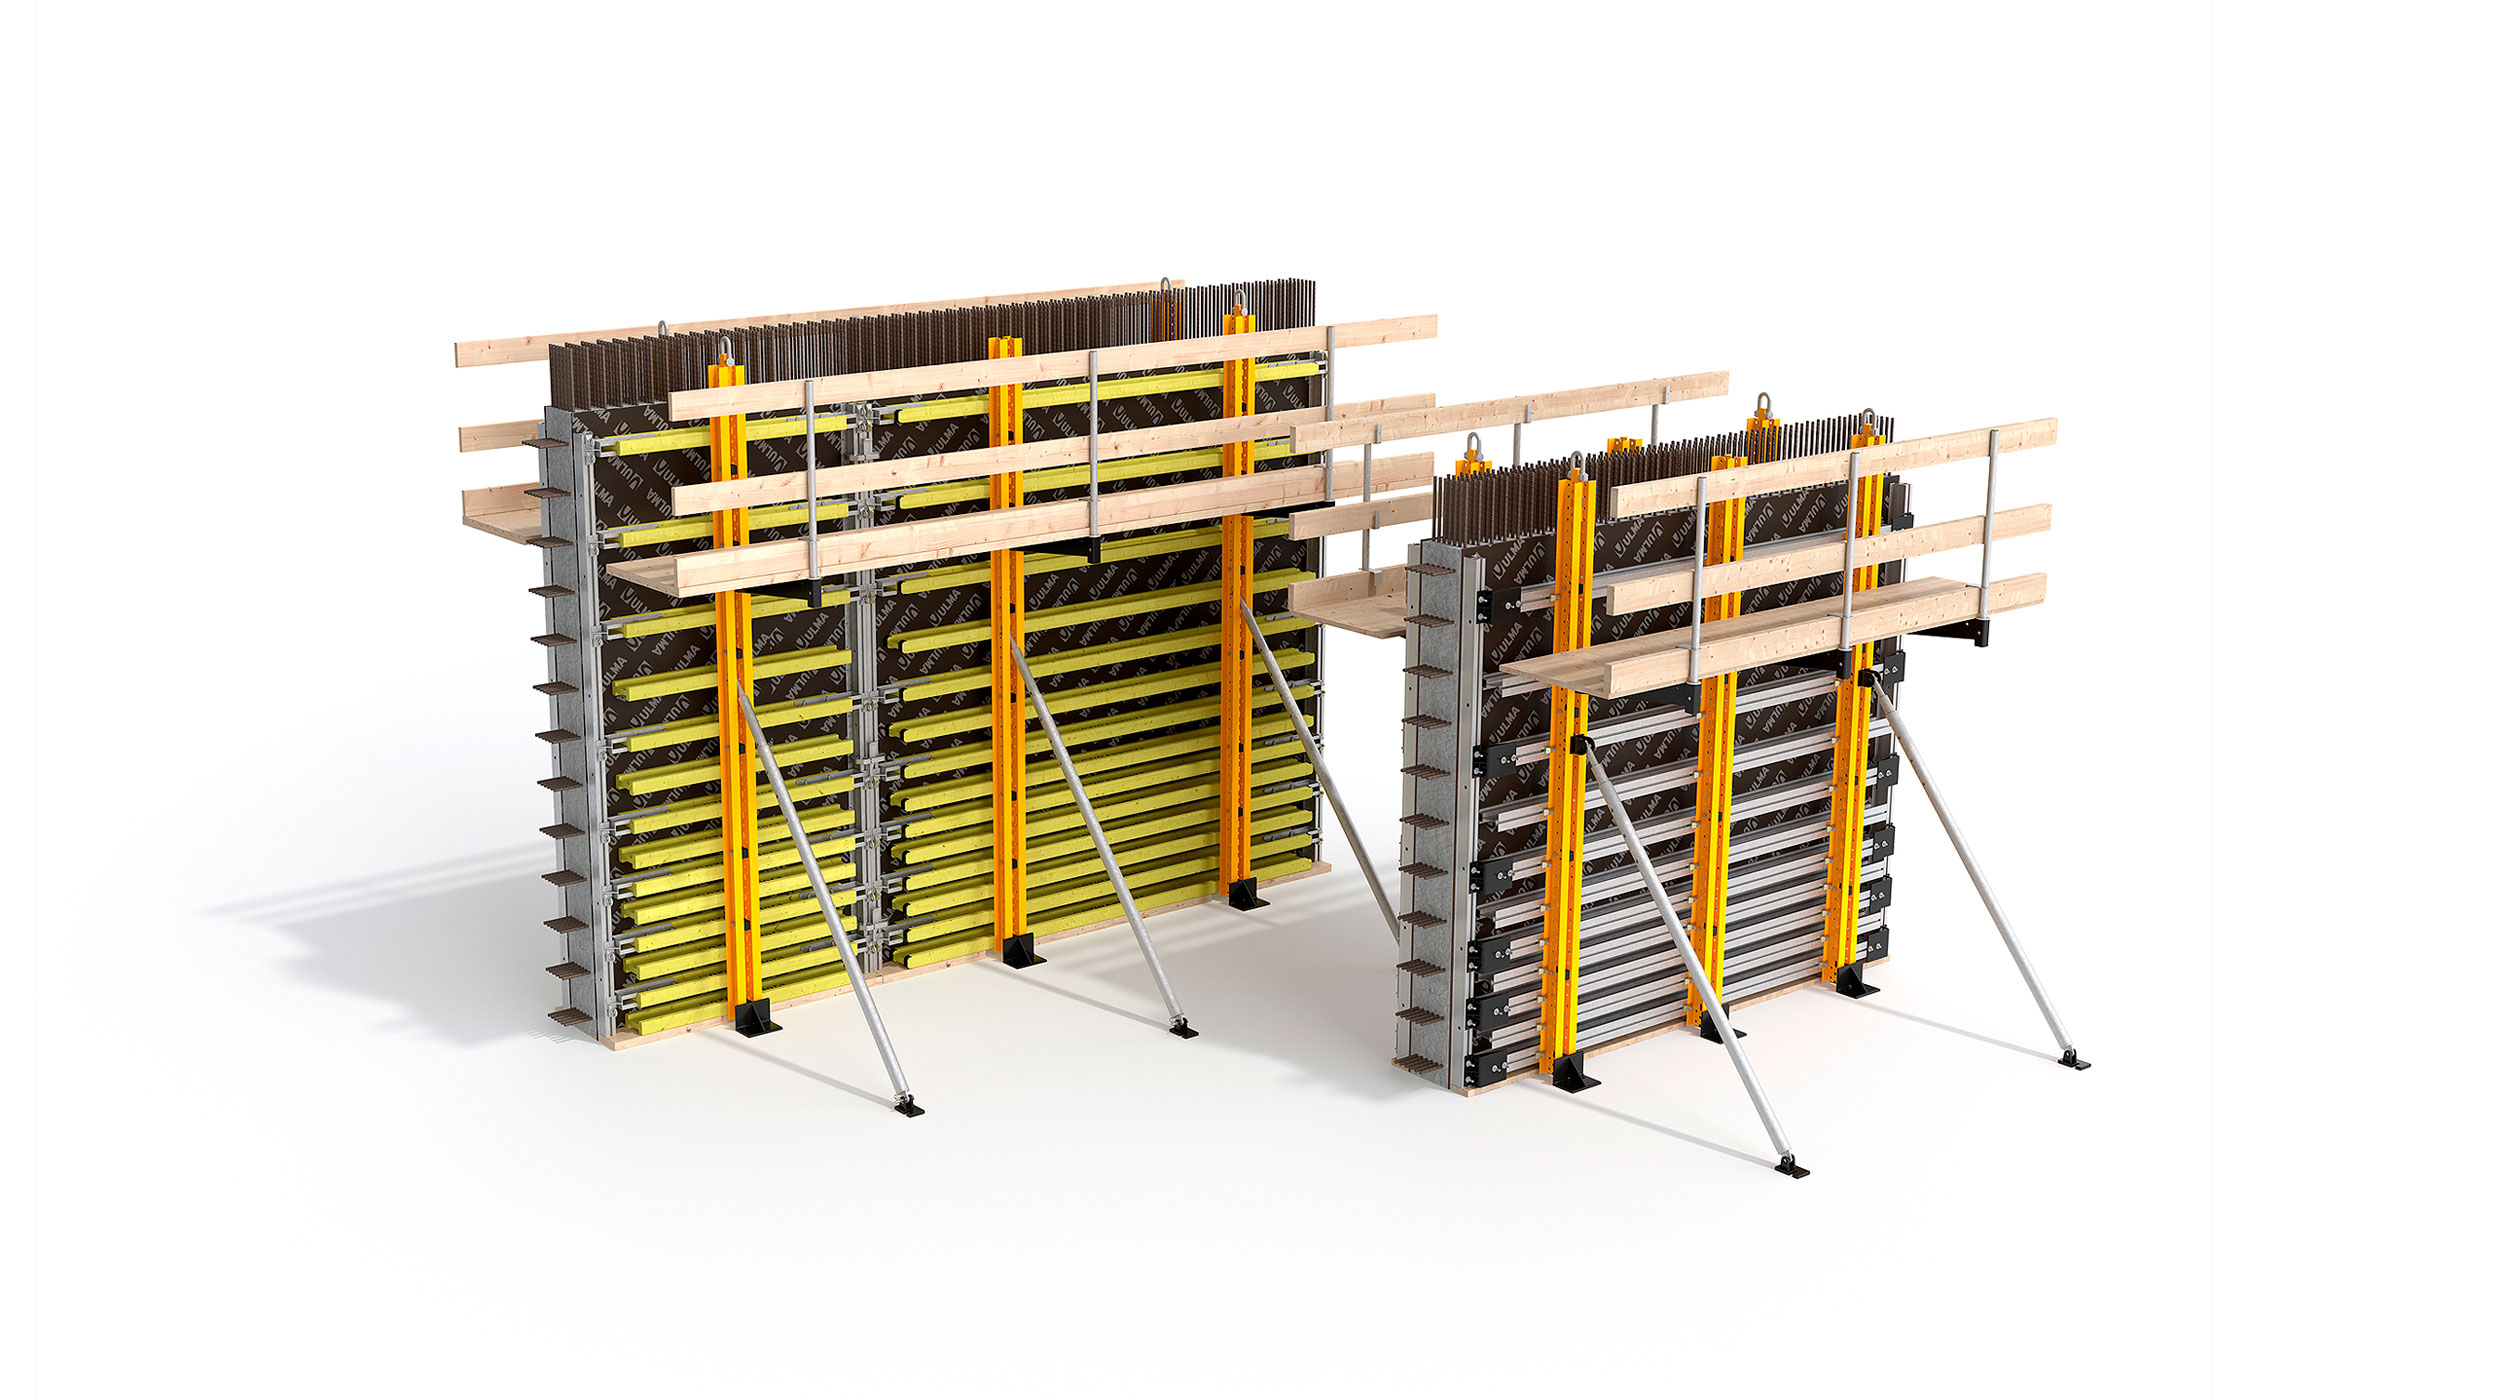 Steel waler and wood or aluminum beam forming modular system designed for architectural concrete finish walls and large formwork gangs.